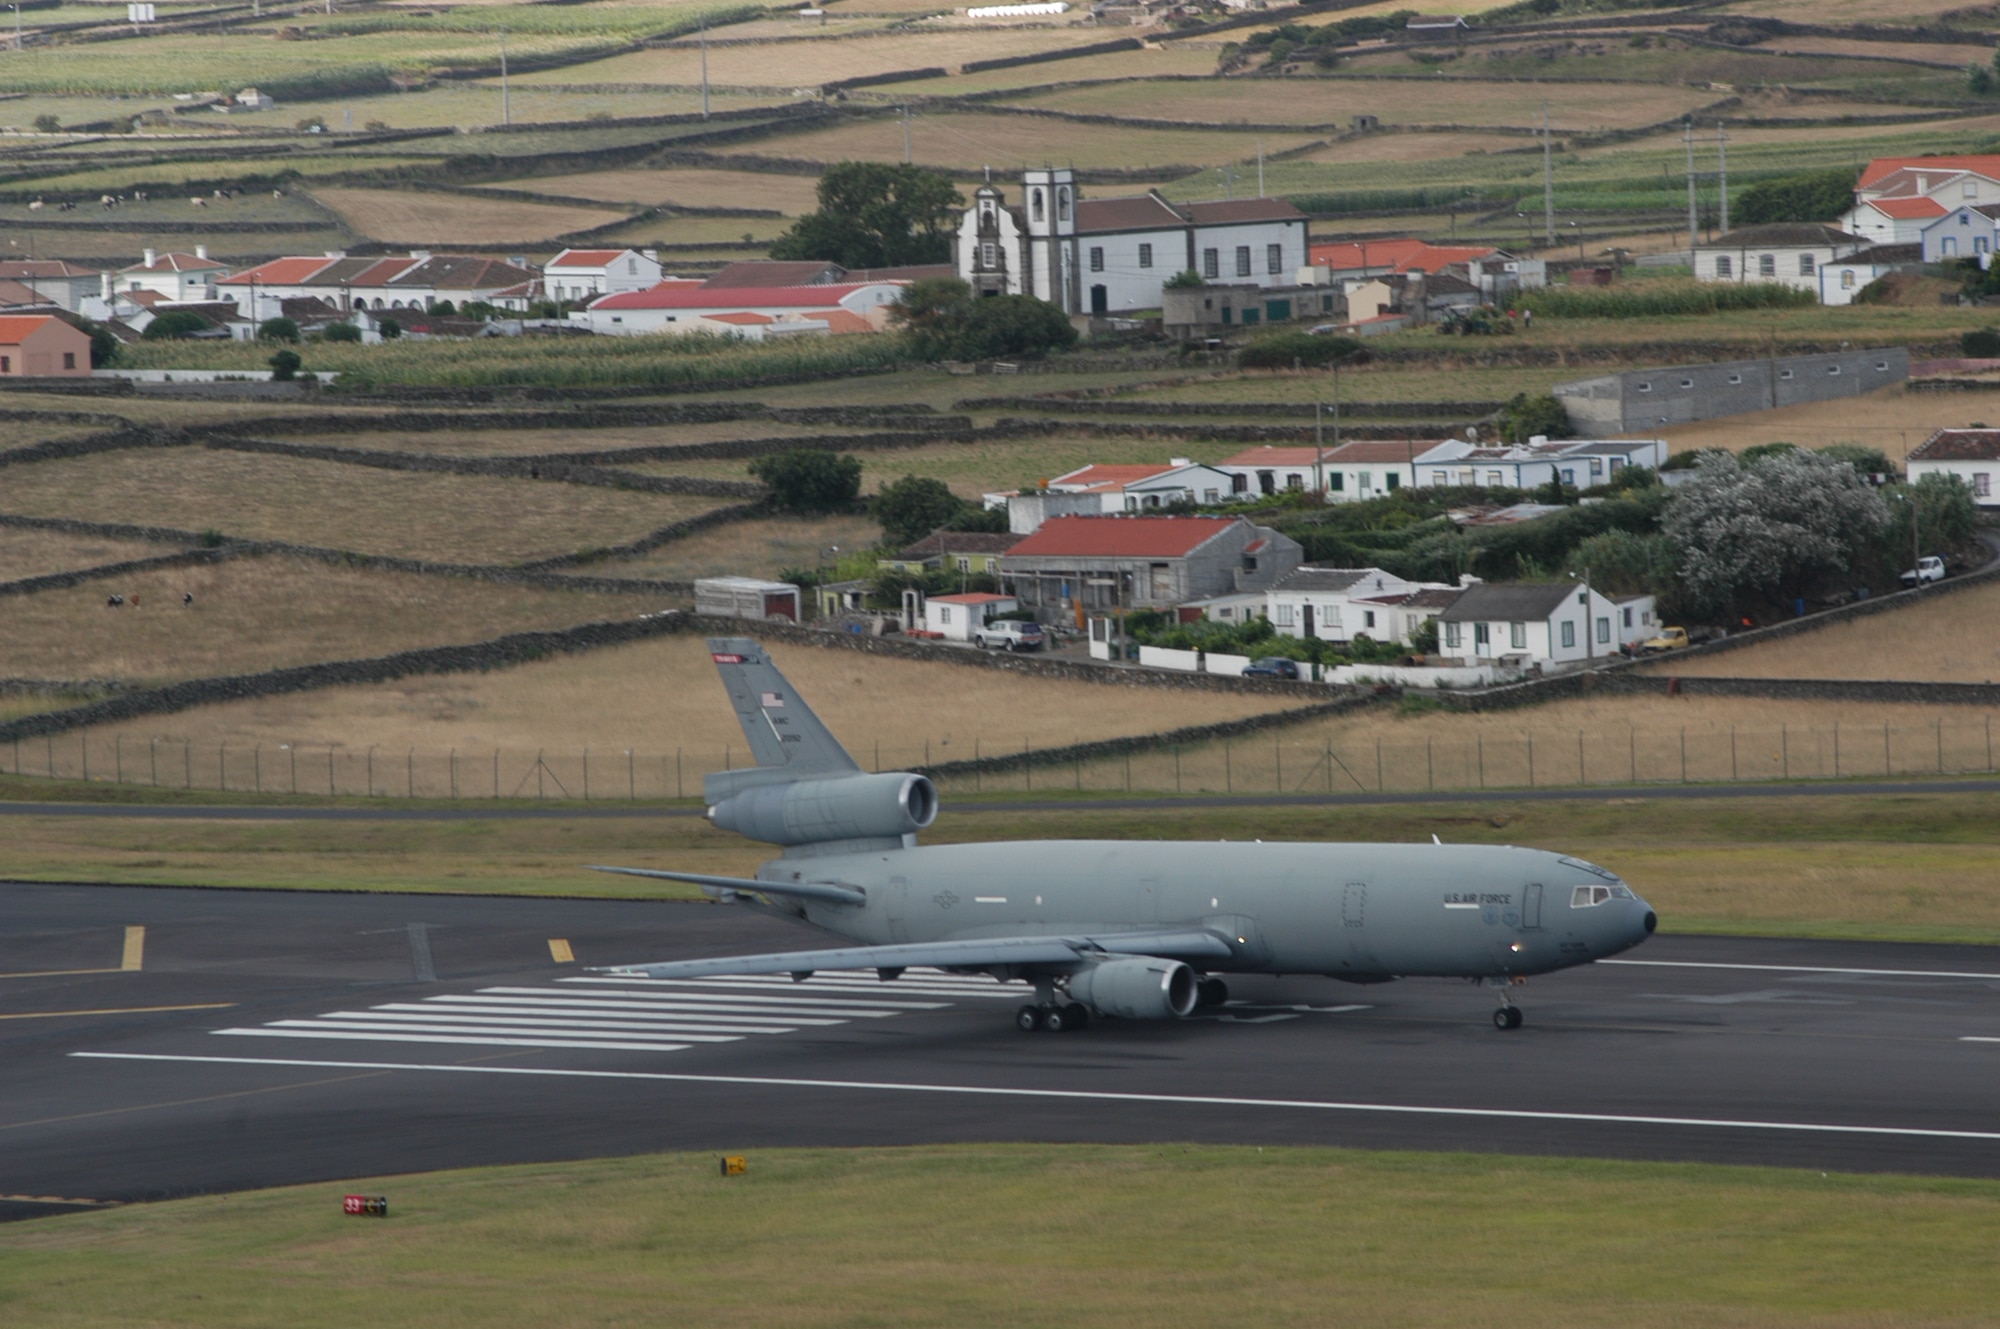 The 65th Air Base Wing is the American unit stationed at Lajes Field, Terceira Island, Azores, Portugal, and it is the largest U.S. military organization in the Azores. The wing provides base and en route support for Department of Defense, allied nations and other authorized aircraft in transit, including those from the Netherlands, Belgium, Canada, France, Italy, Colombia, Germany, Venezuela and Great Britain. 